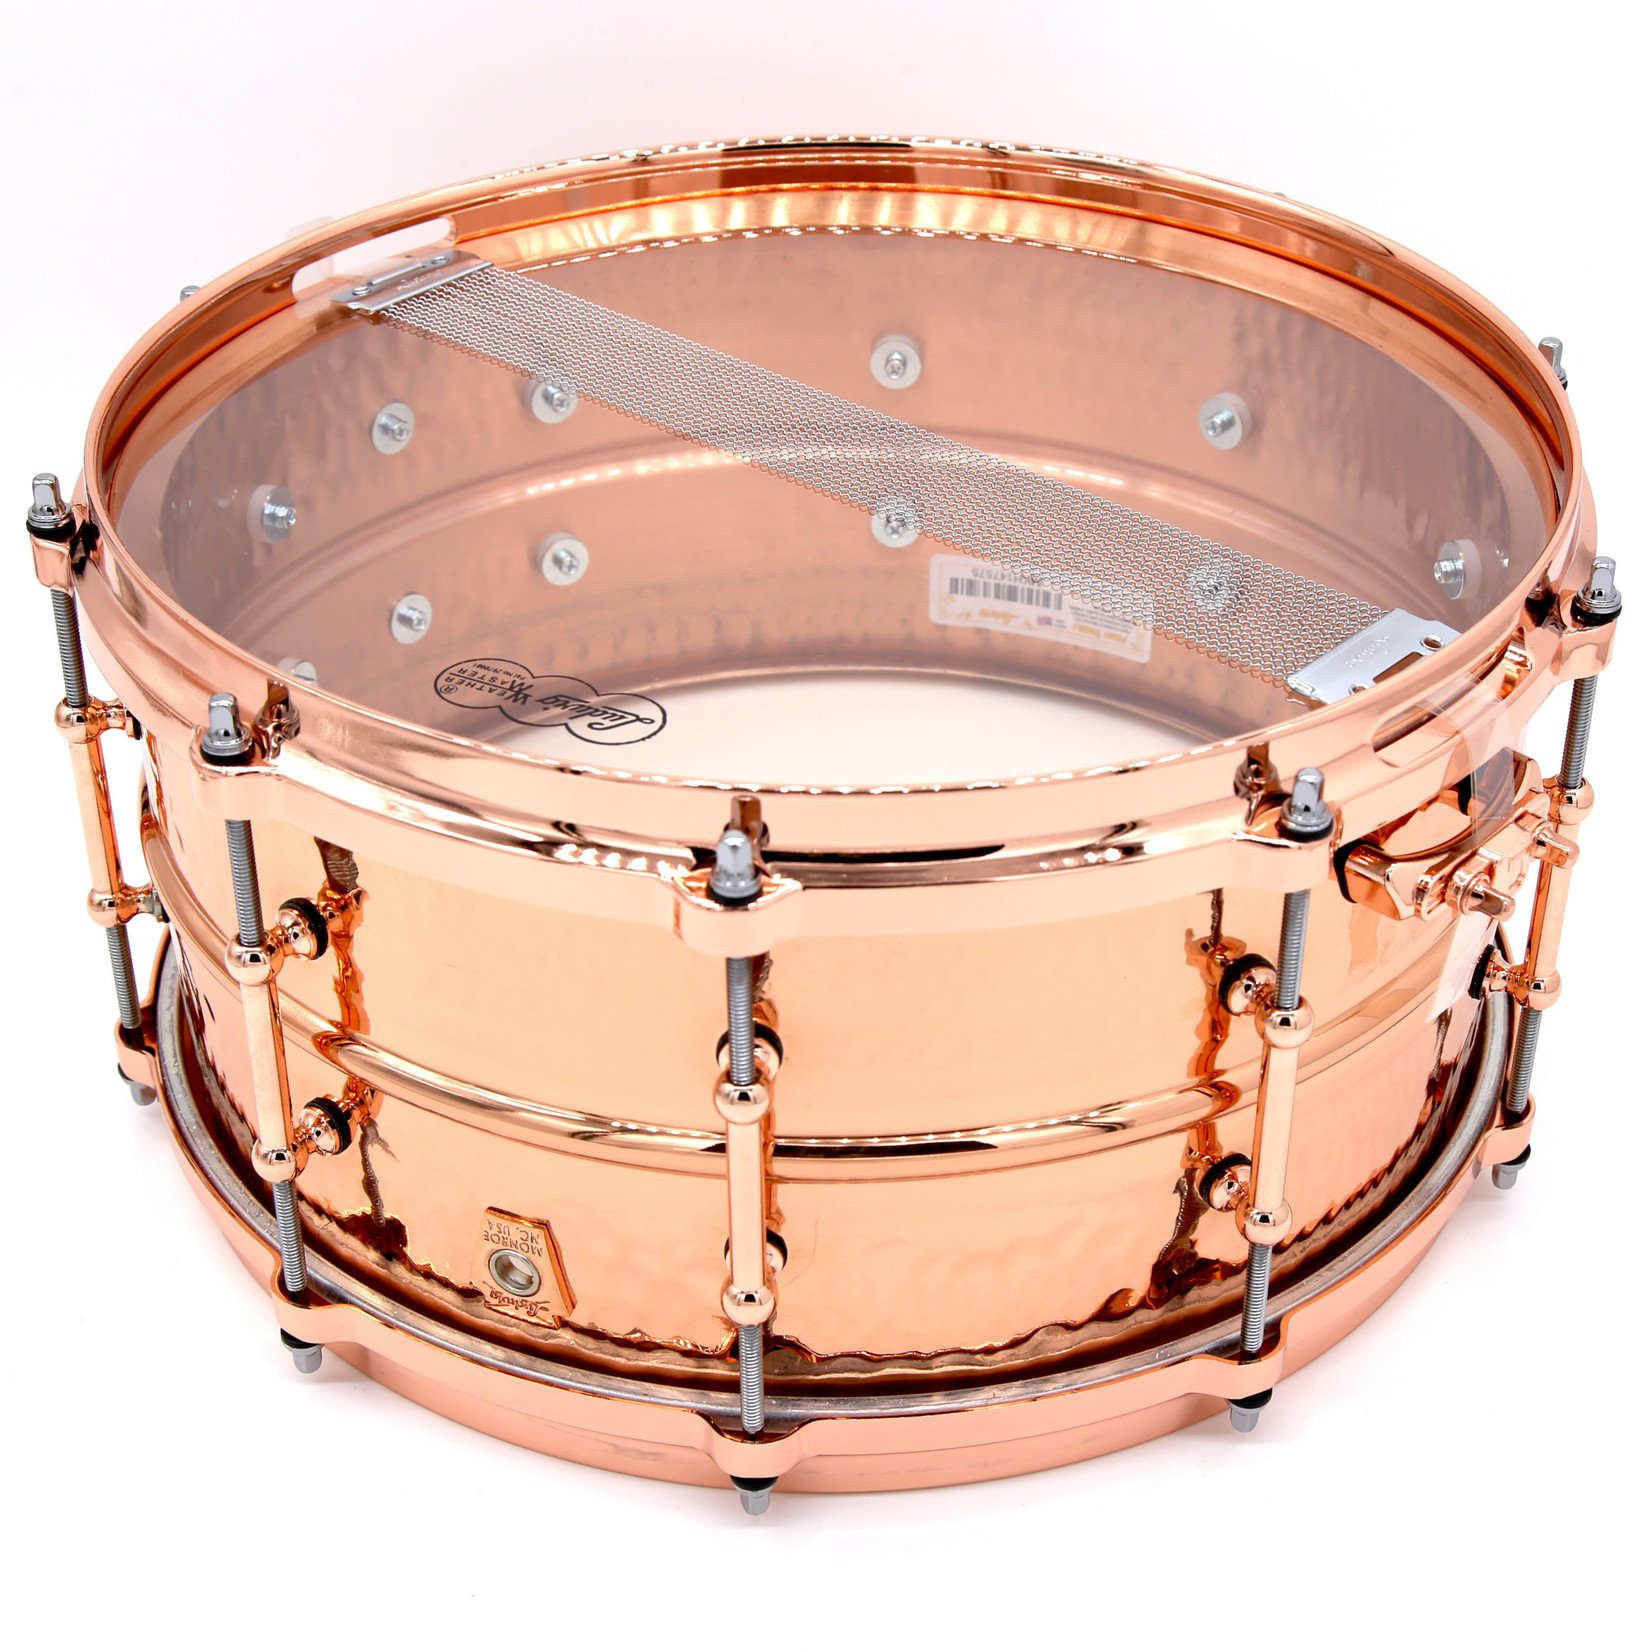 Ludwig Ludwig Copperphonic 6.5x14" Hammered With Tube Lugs And Copper Hardware LC662KTC